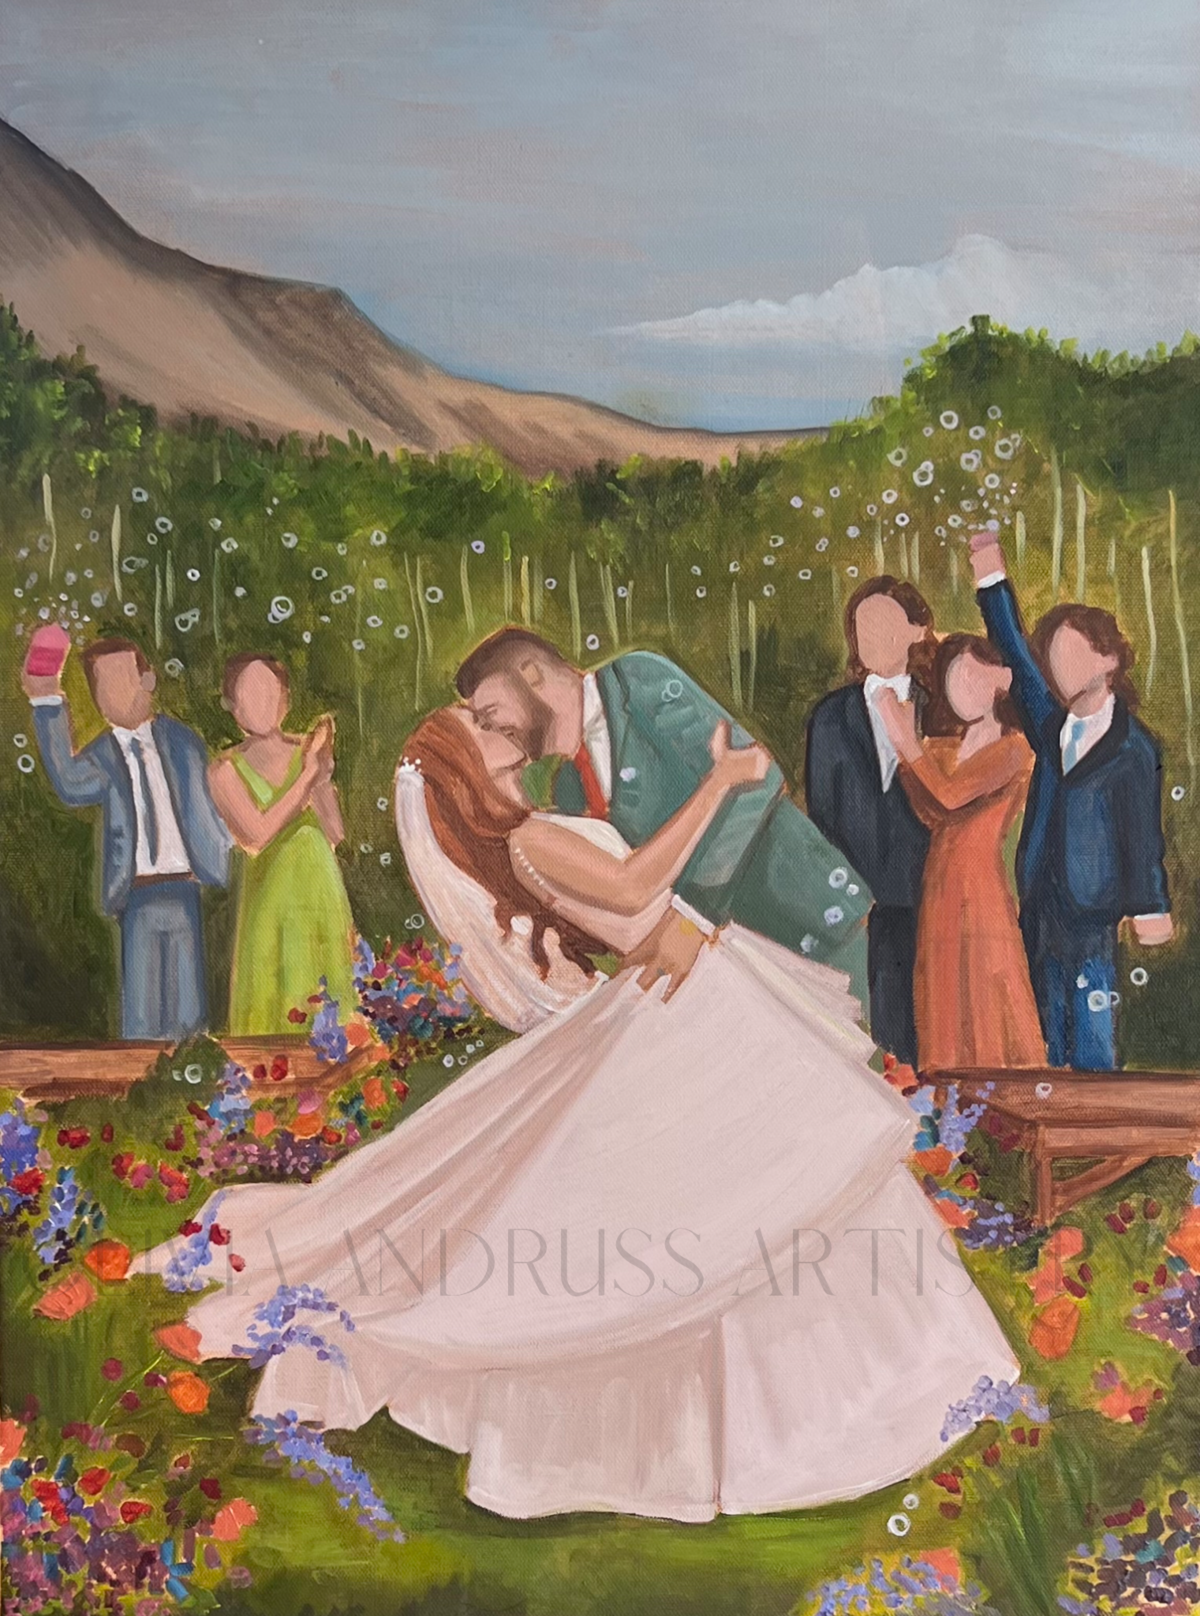 A husband and wife share a dipping kiss and the end of the aisle in this oil painting by Olivia Andruss in Rocky Mountain National Park Colorado